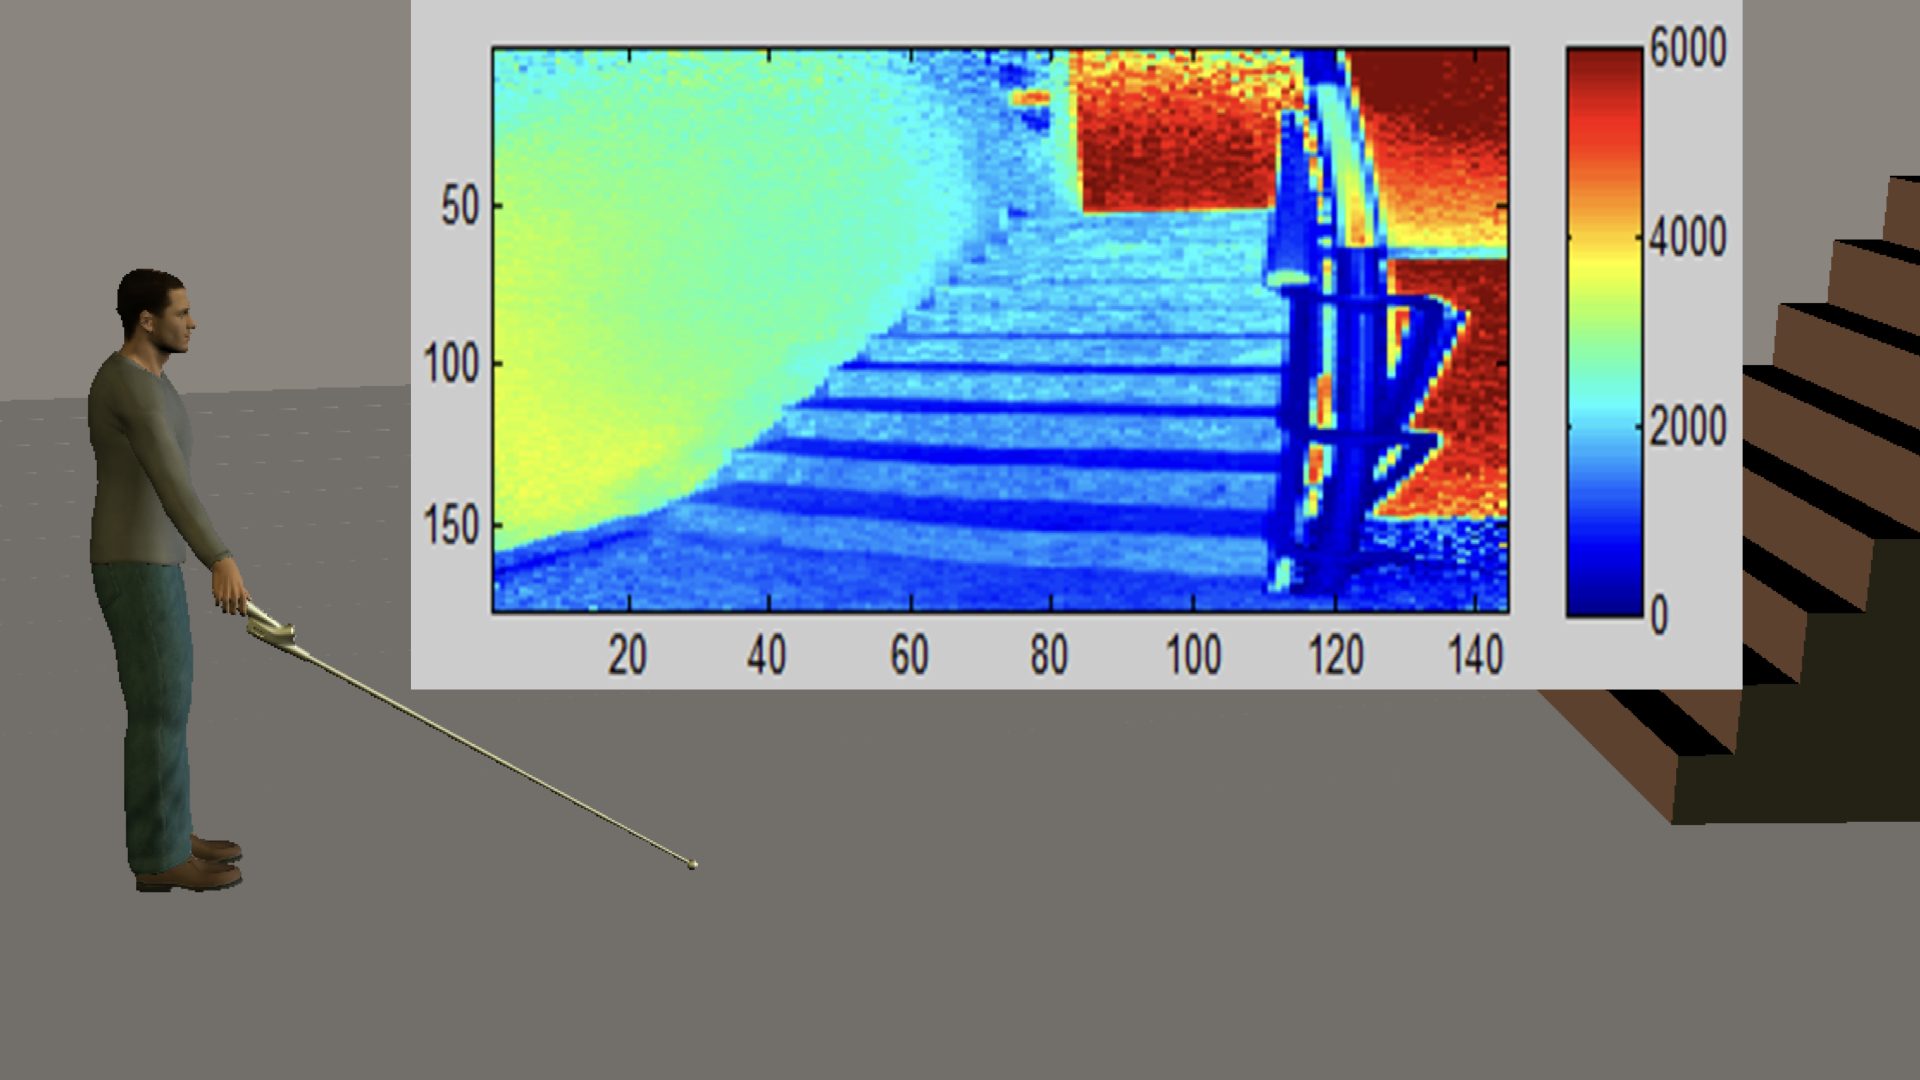 Enlarged view: 3D scan of a staircase as detected by the blind cane